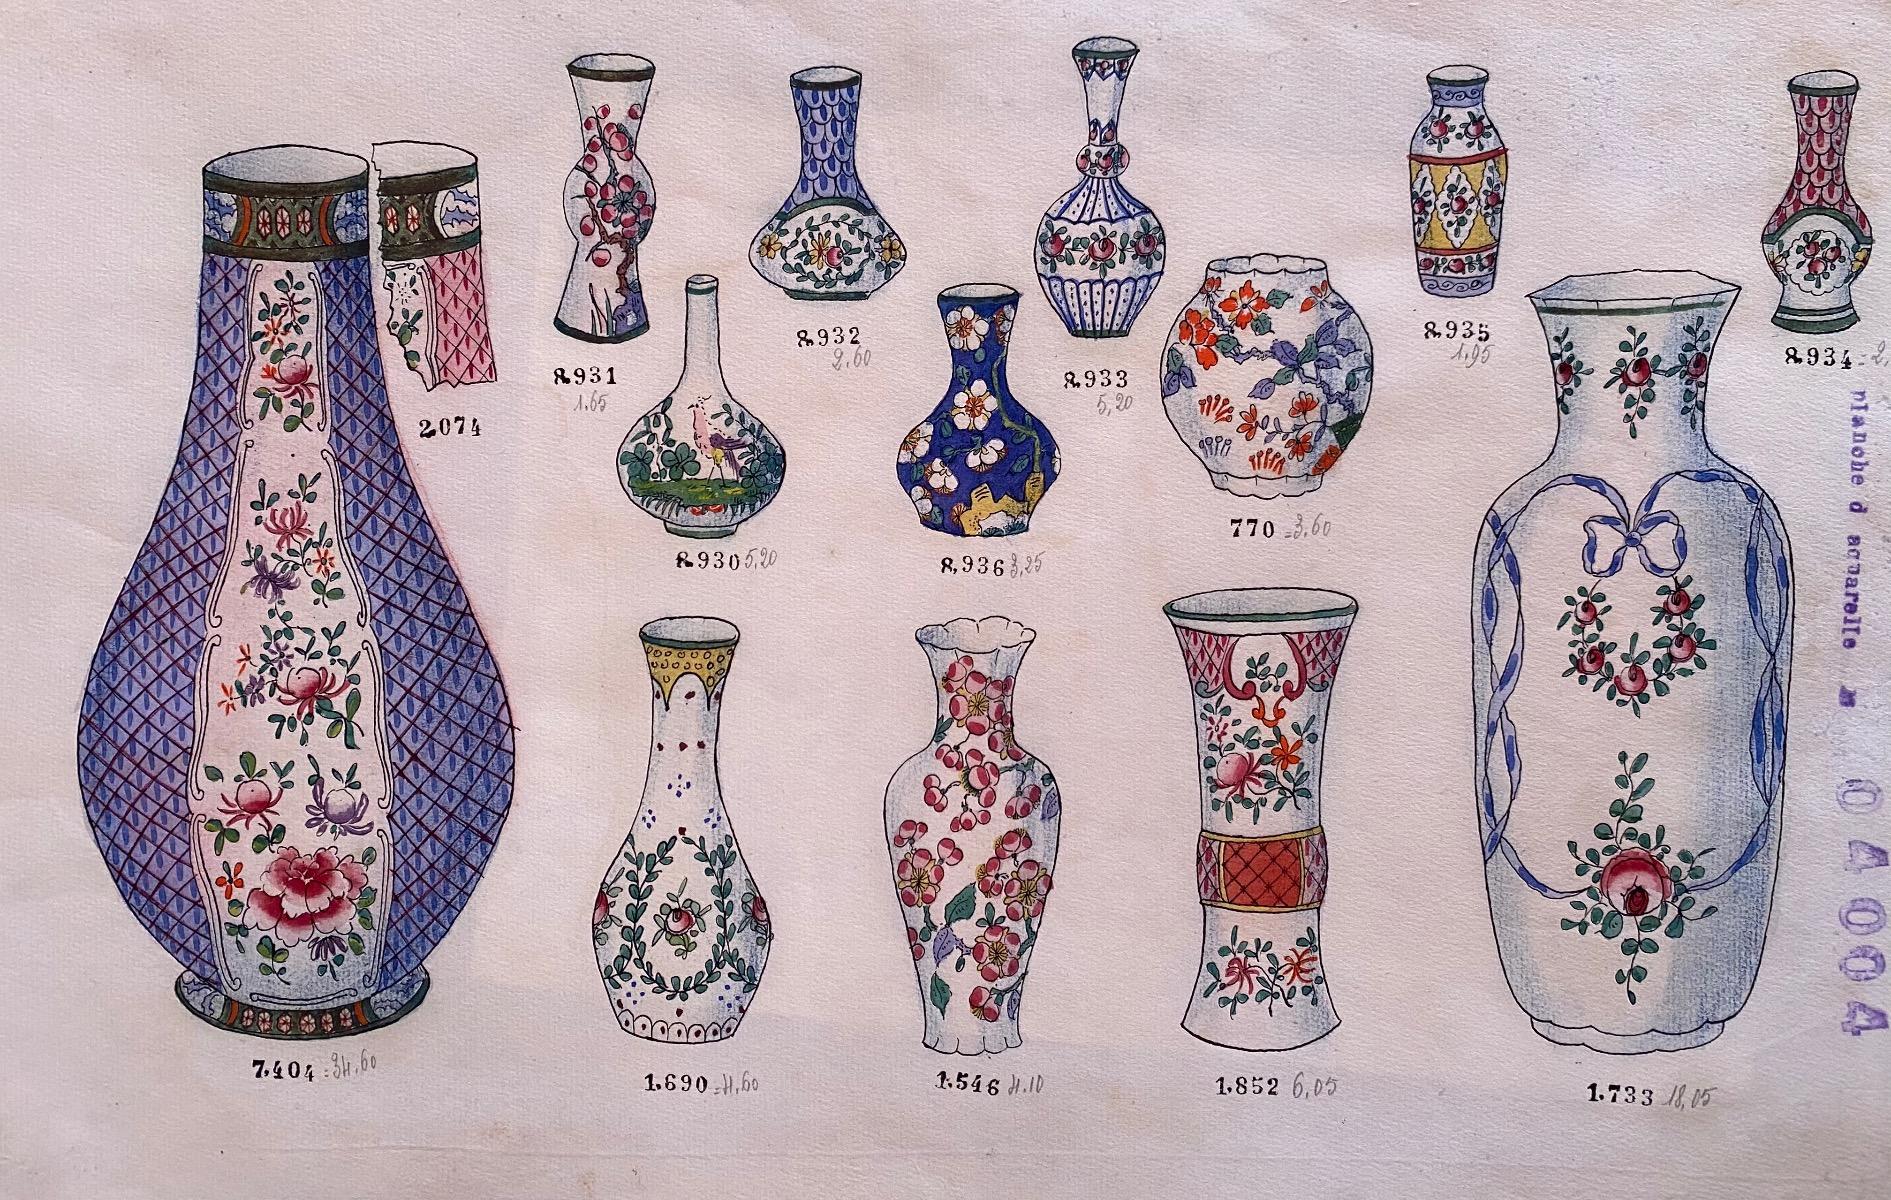 Unknown Figurative Art - Porcelain Vases - Original China Ink and Watercolor - 1890 ca.